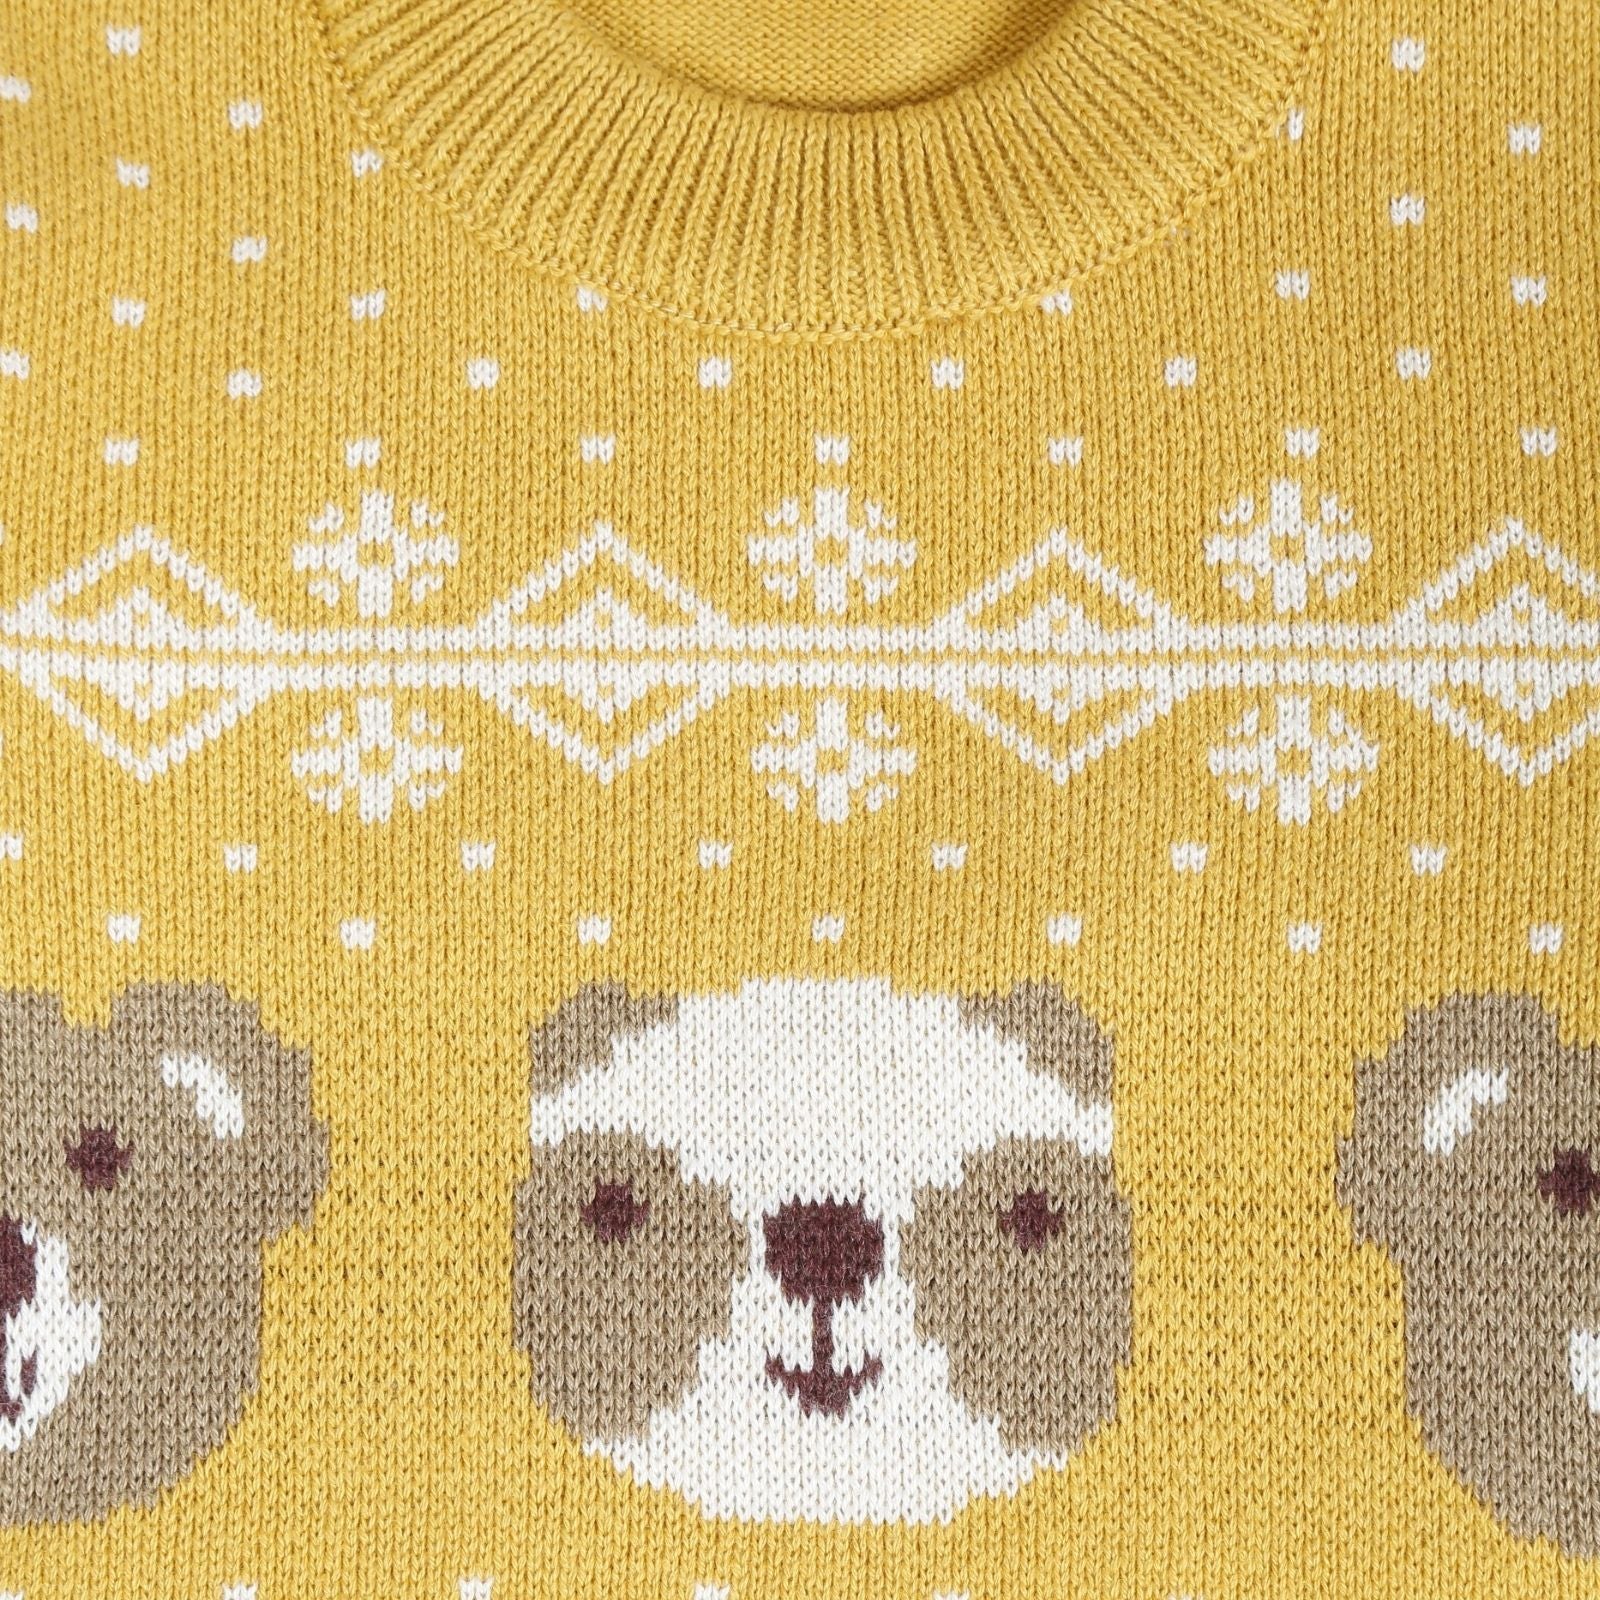 Greendeer Enchanting Bear & Cheerful Dog 100% Cotton Sweater with Lower Set of 4